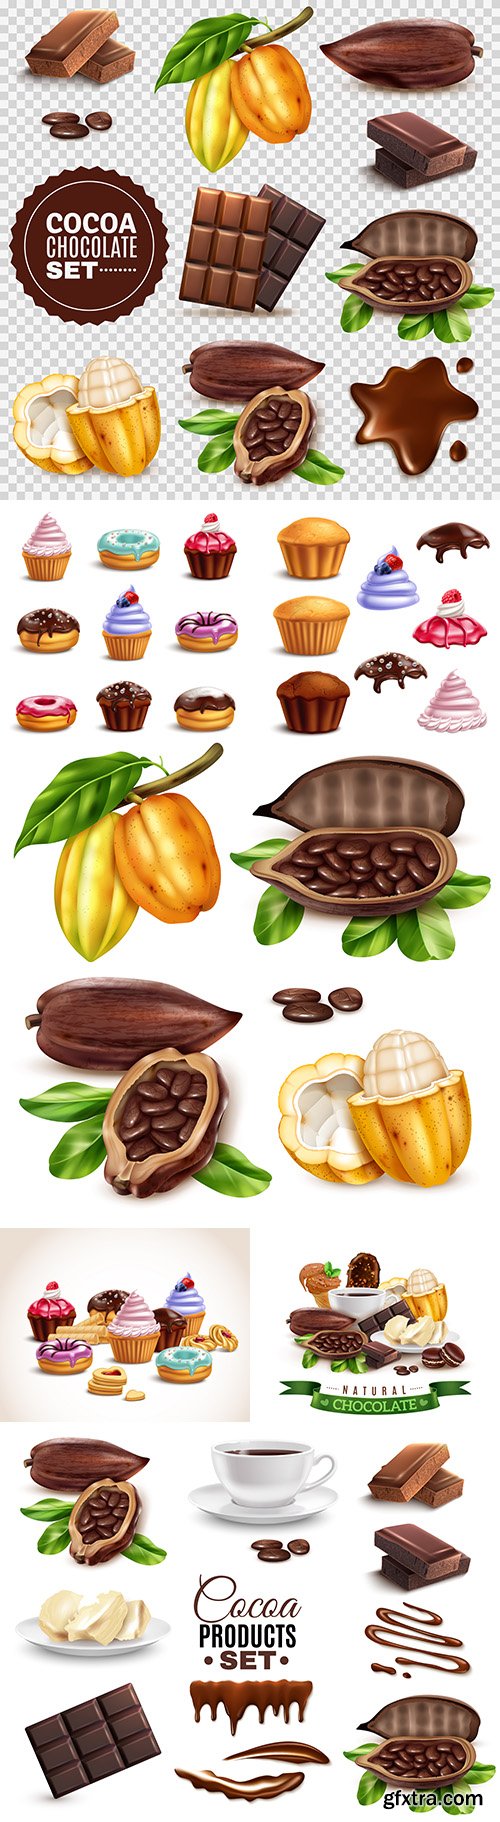 Cocoa, chocolate and sweet baking 3d illustration